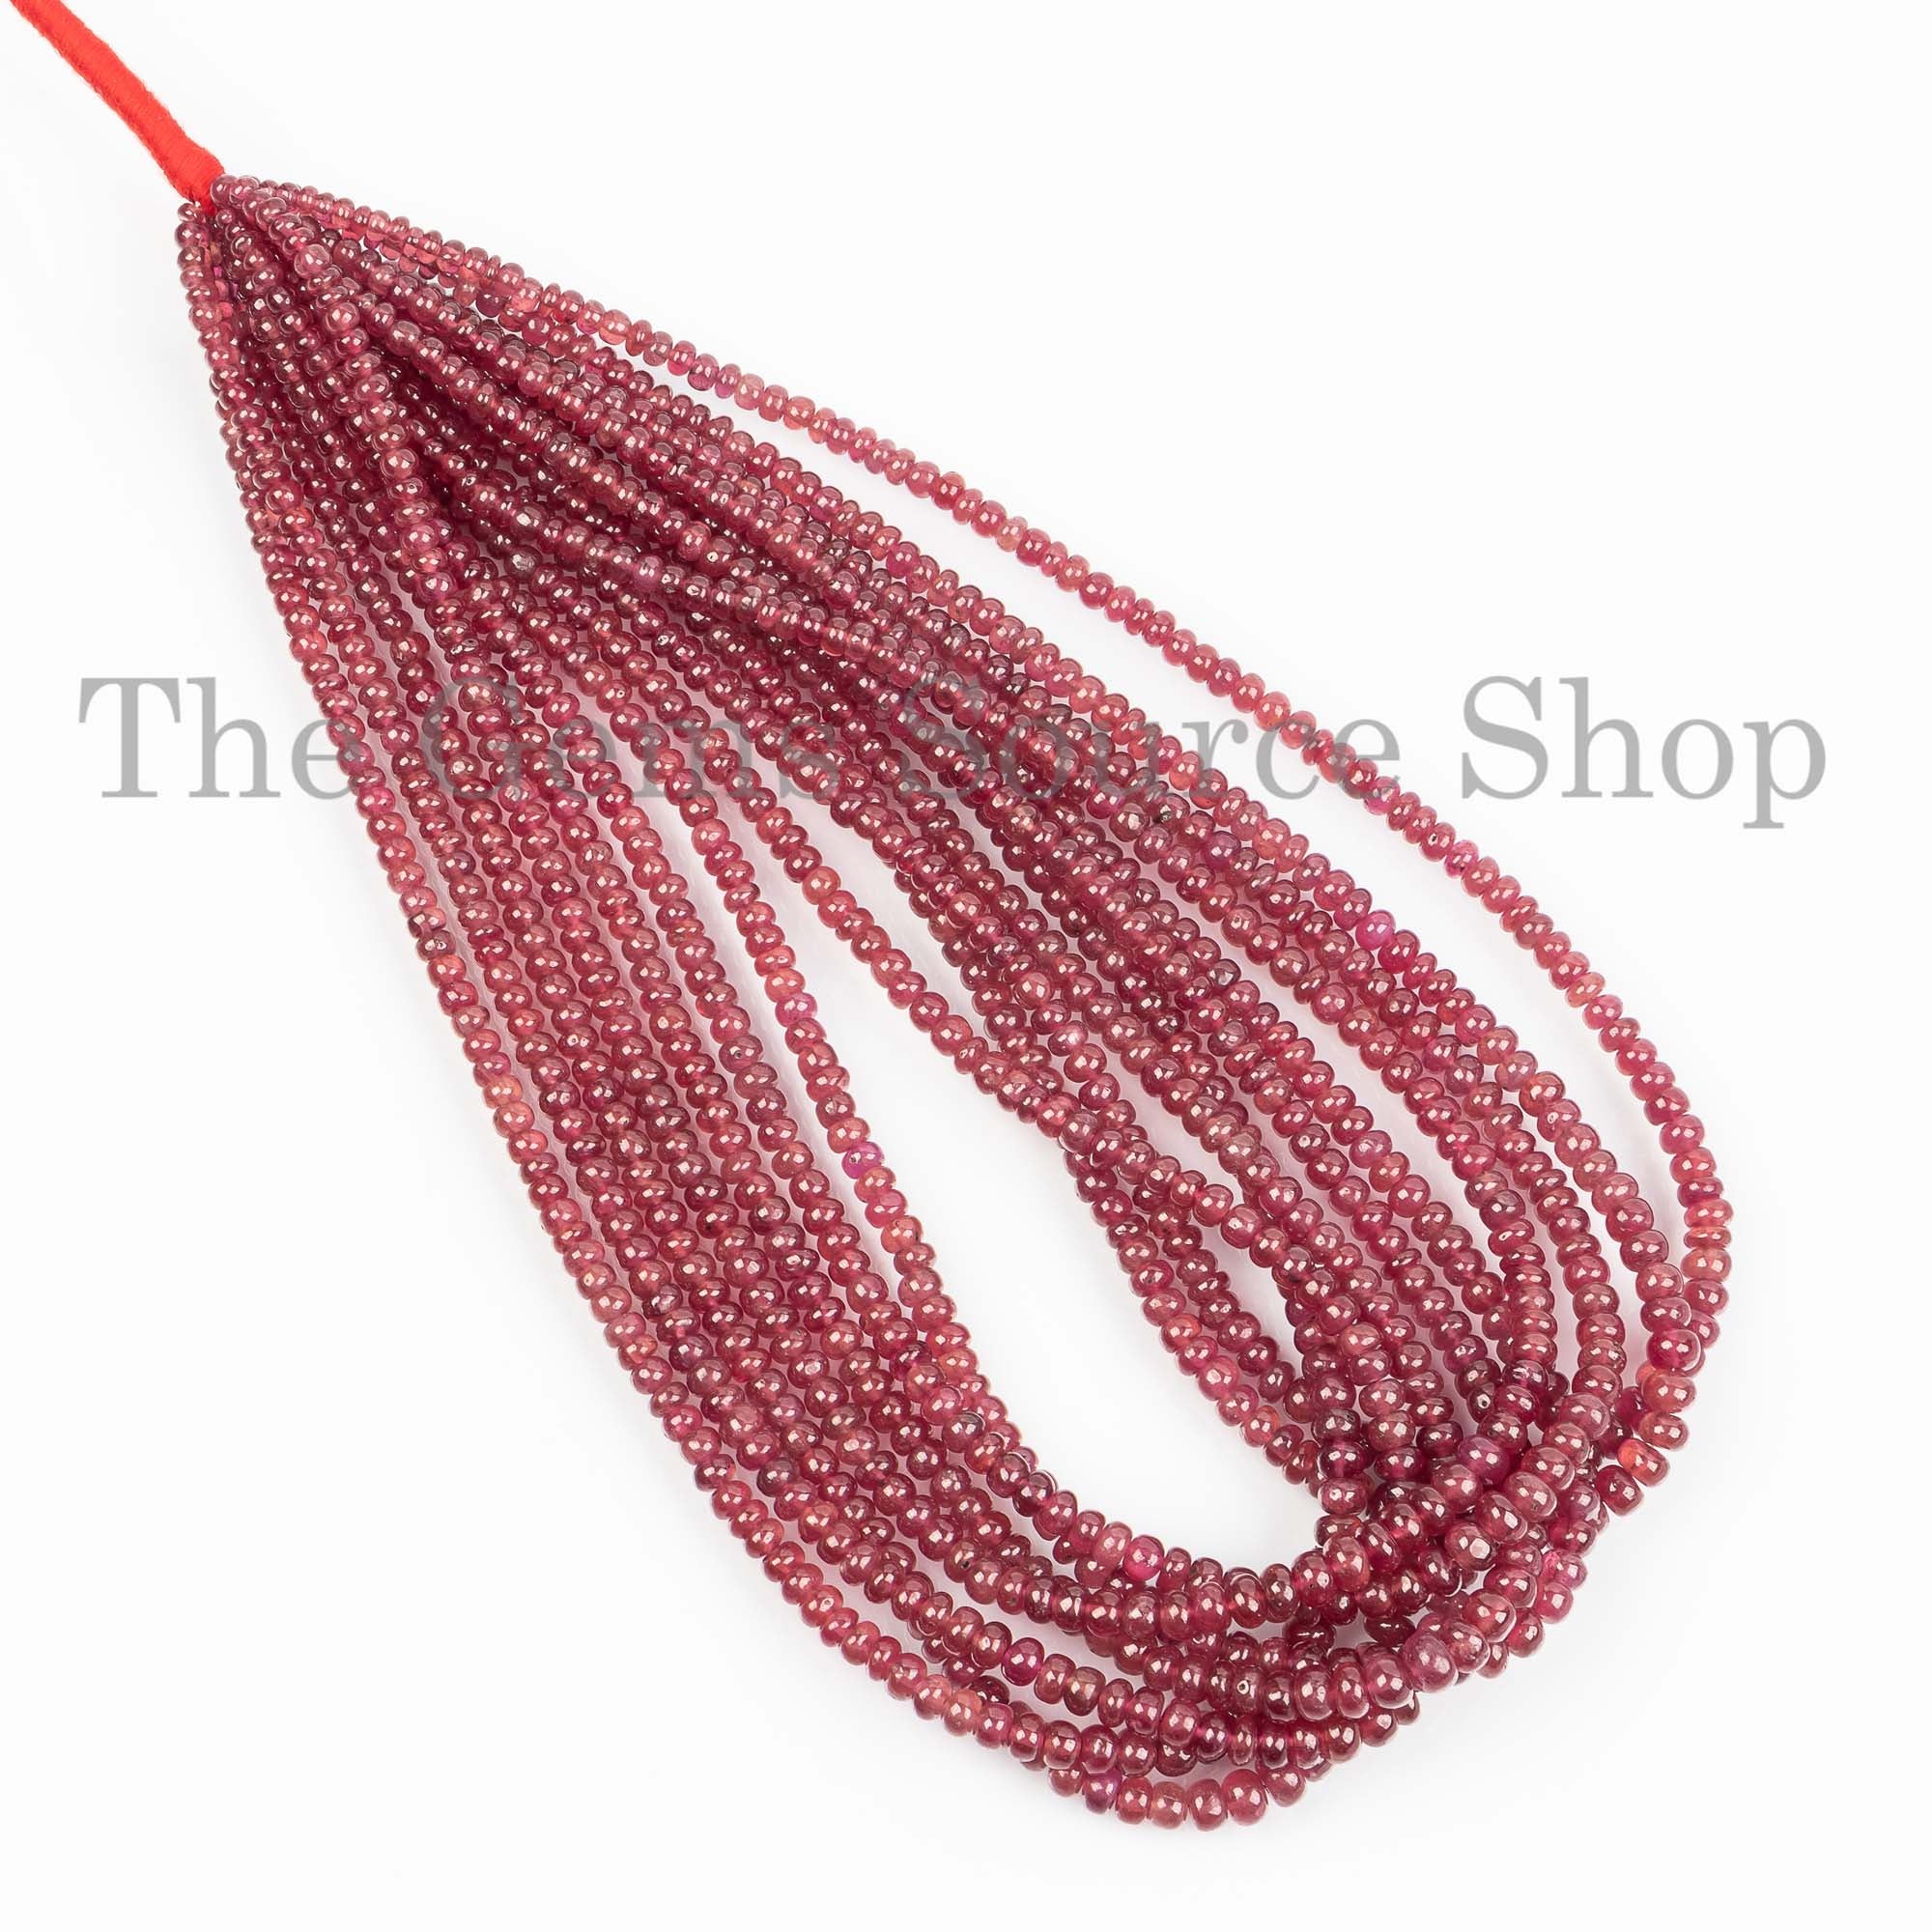 Natural Ruby Smooth Rondelle Beads, Ruby Beaded Gemstone For Jewelry Making, Wholesale Ruby Plain Beads